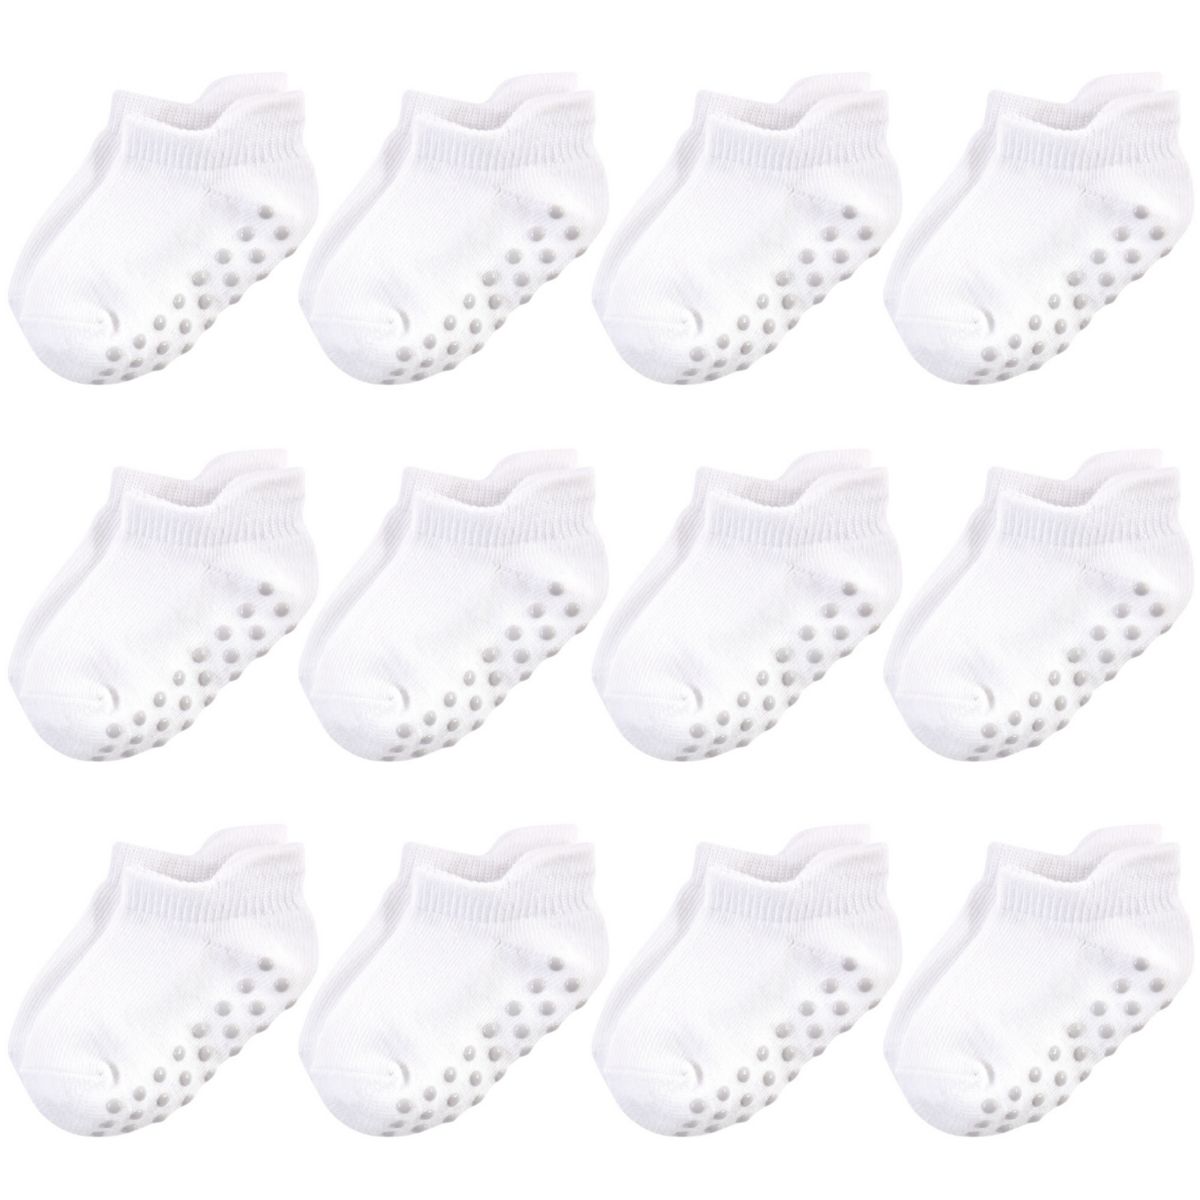 Touched by Nature Baby and Toddler Unisex Organic Cotton Socks with Non-Skid Gripper for Fall Resistance, White No-Show Touched by Nature